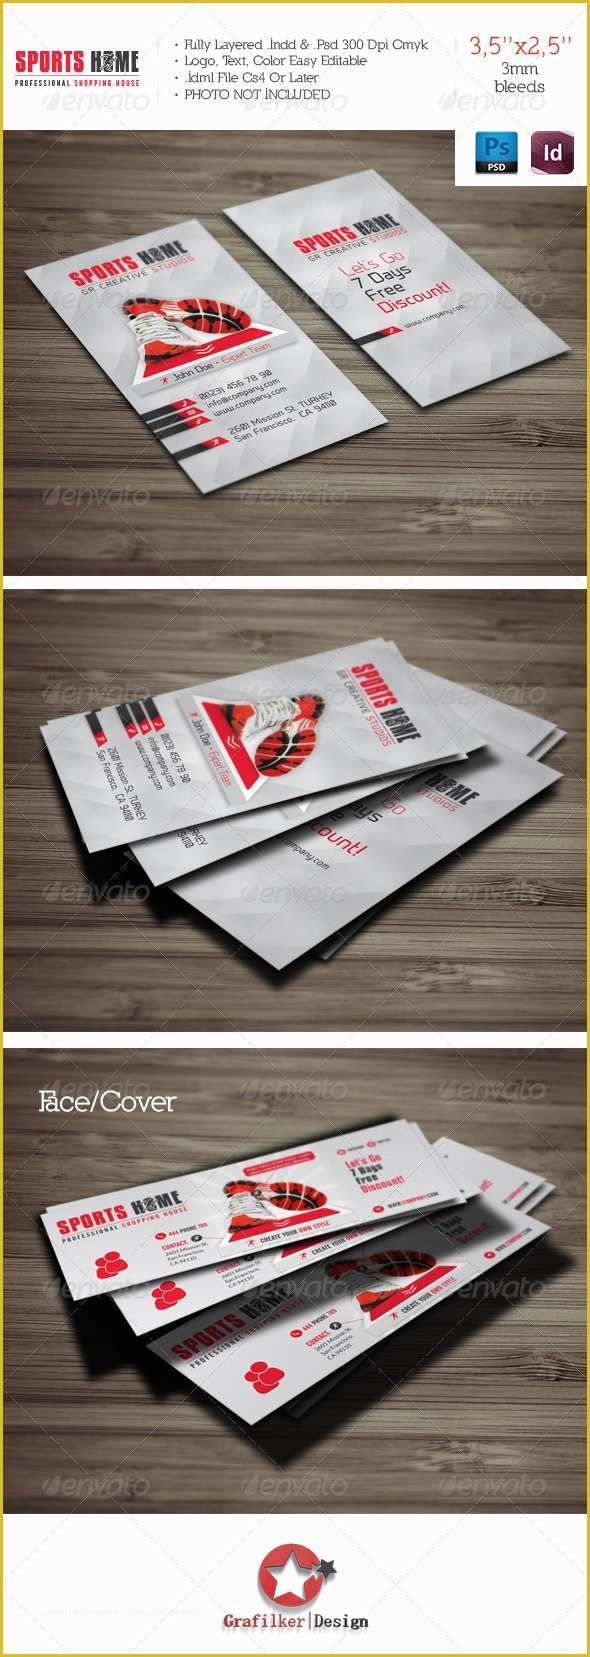 Sports Business Cards Templates Free Of Sports House Business Card Template by Grafilker